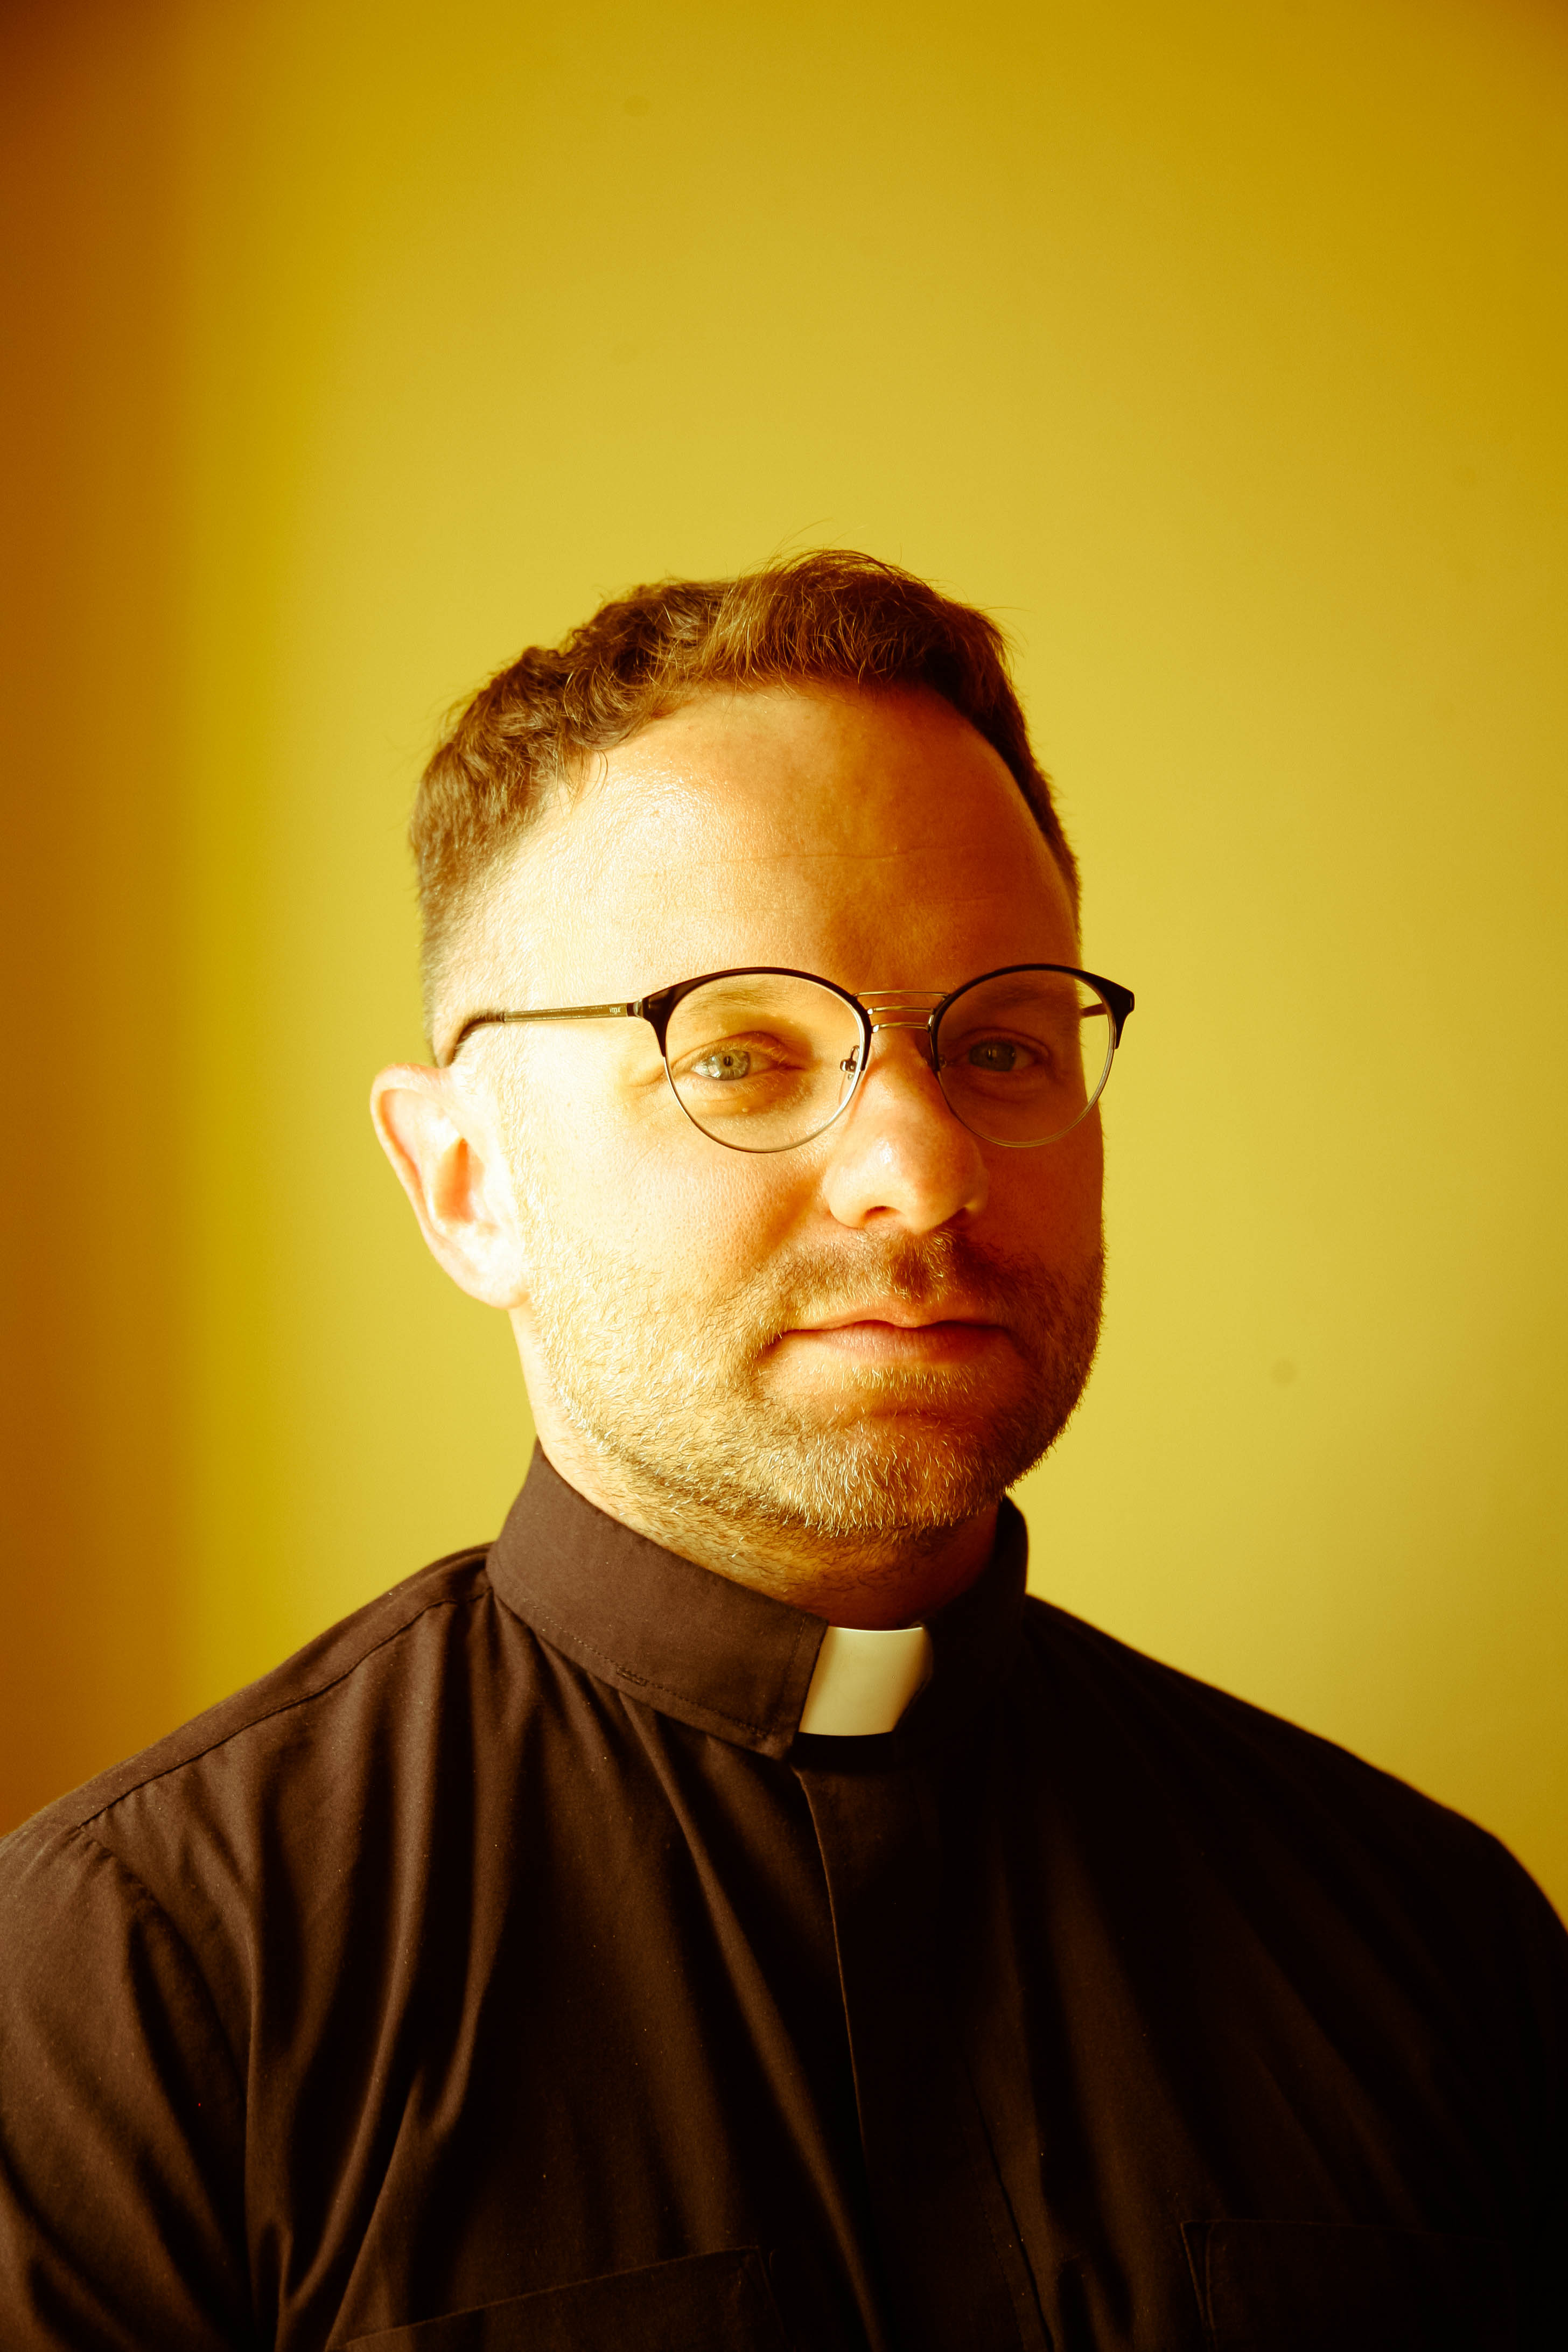 Fr. Damian Ference